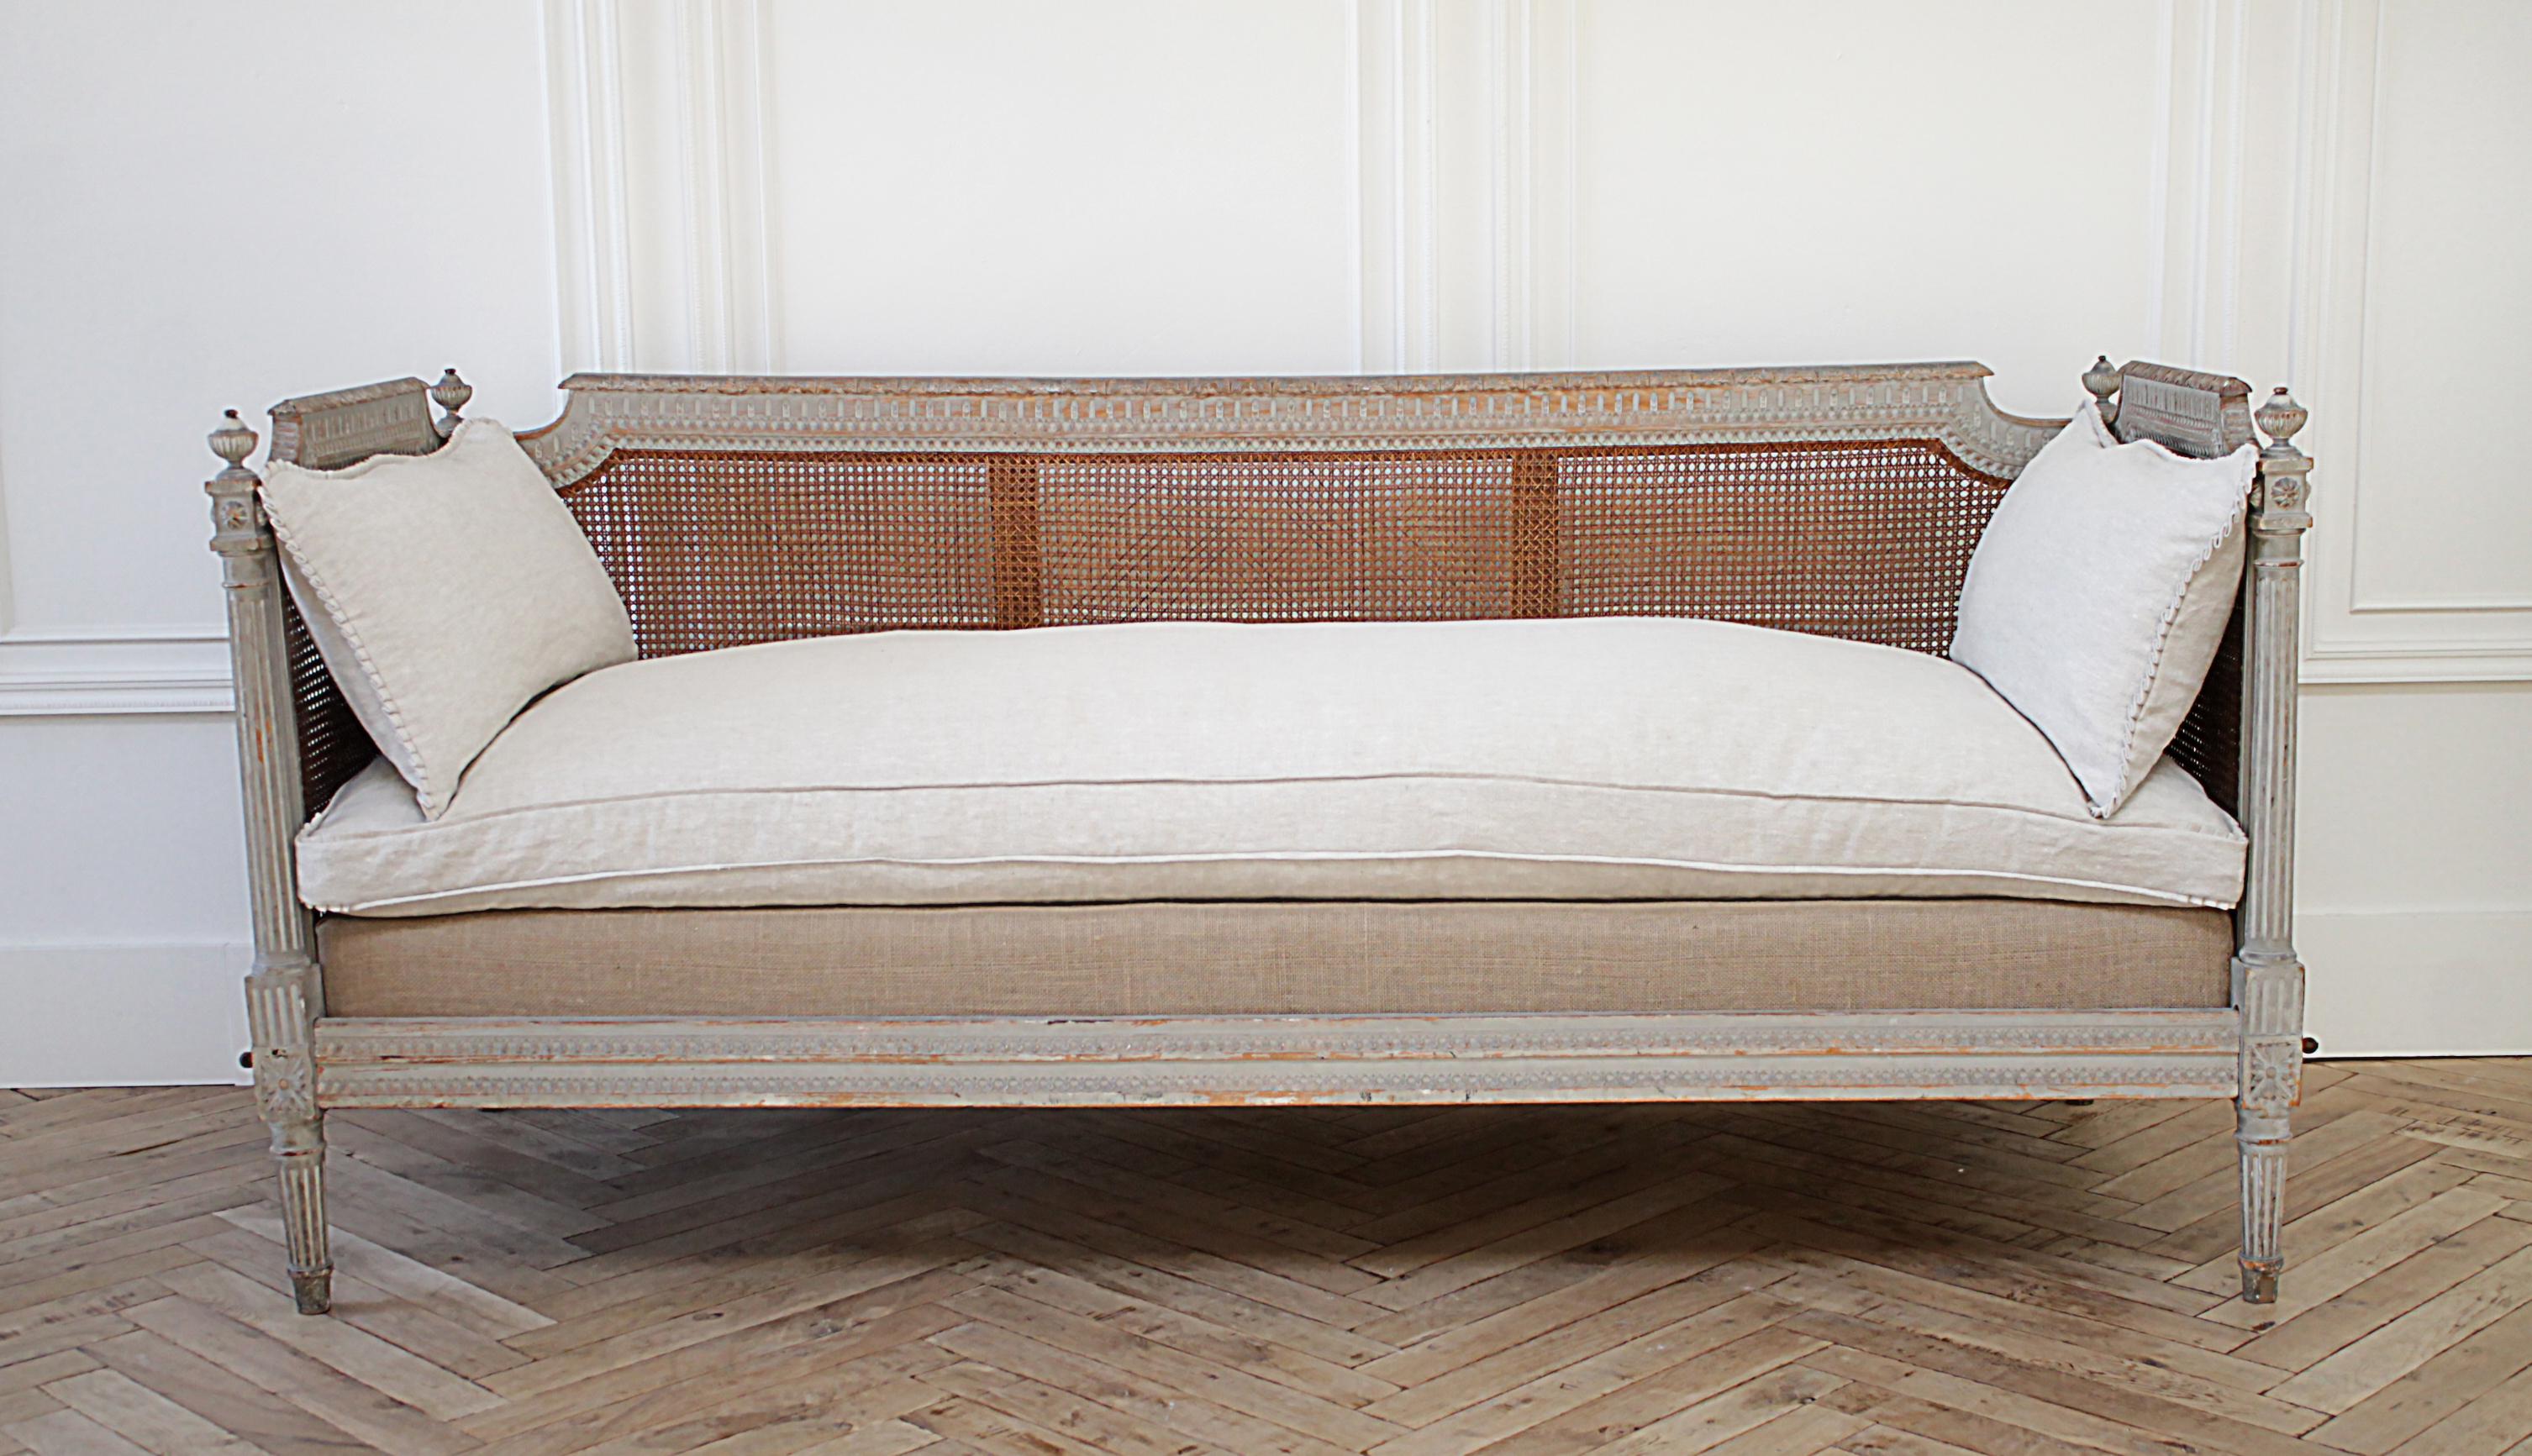 19th century carved and original painted Louis XVI style cane daybed
painted in a light French gray color, which is original, it has a wonderful aged distressed patina. With natural wood tones showing through and antique patina. The cane is